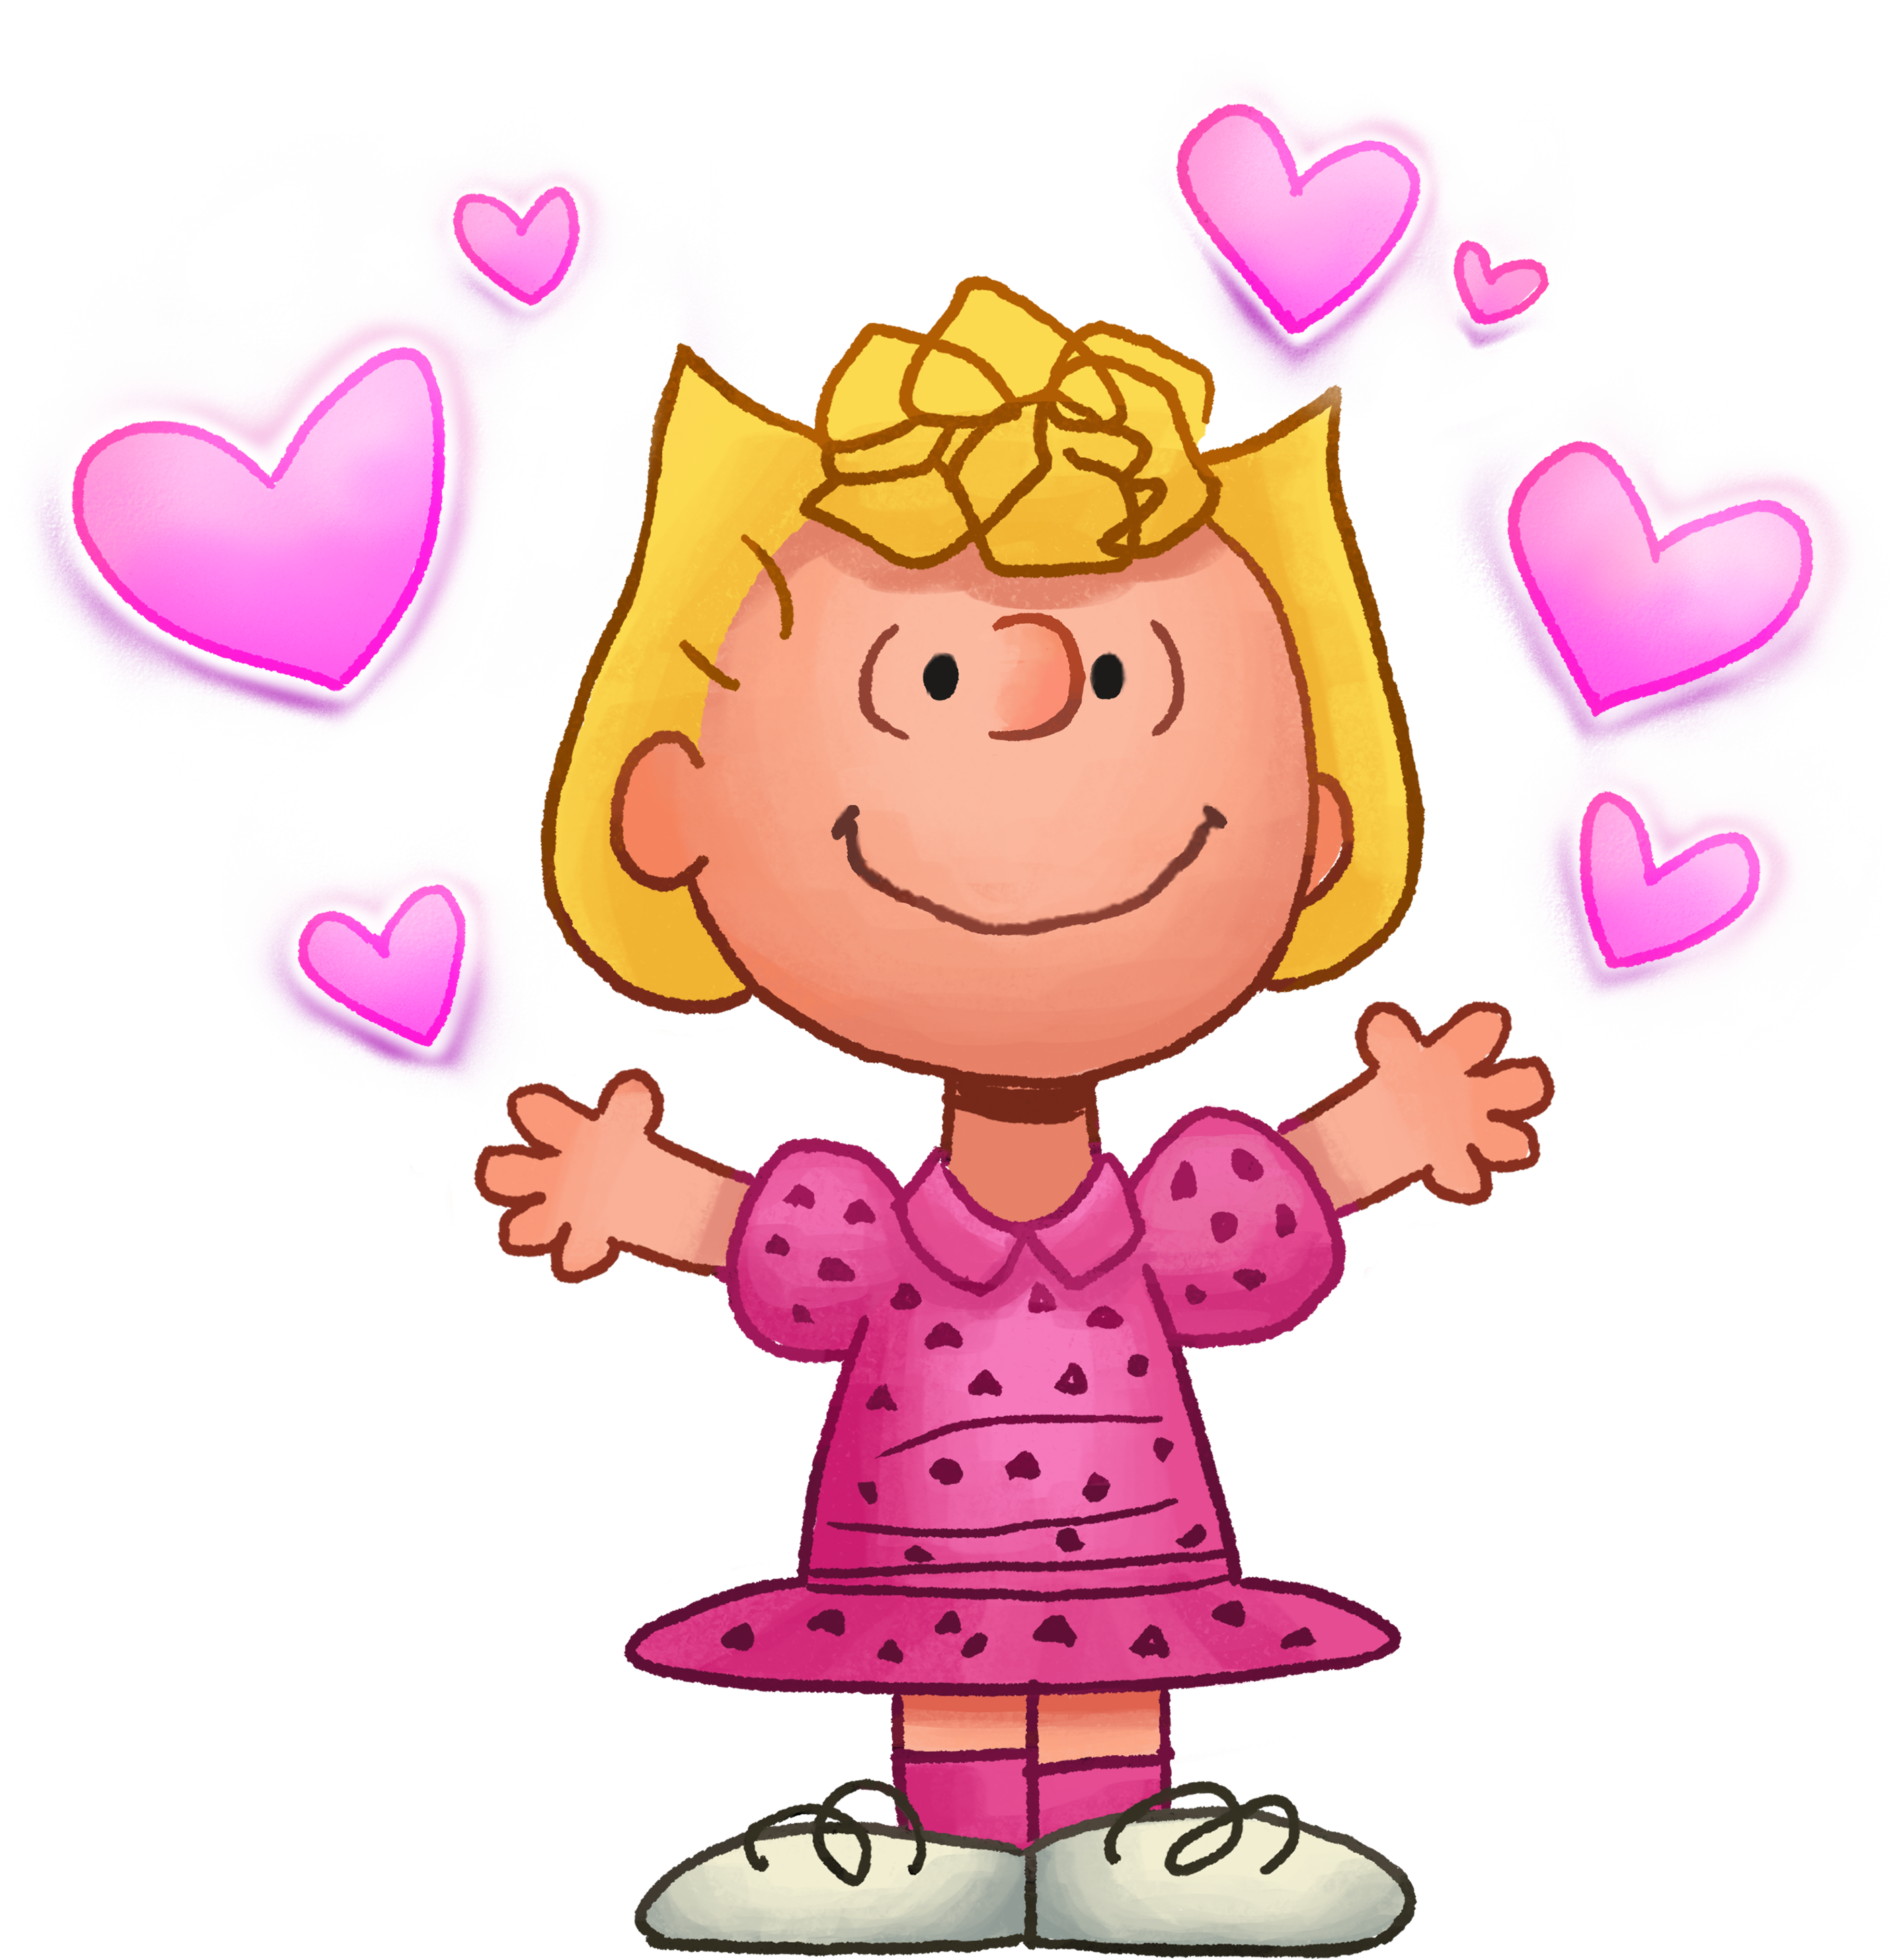 Brown snoopy charlie lucy. Peanuts clipart sally